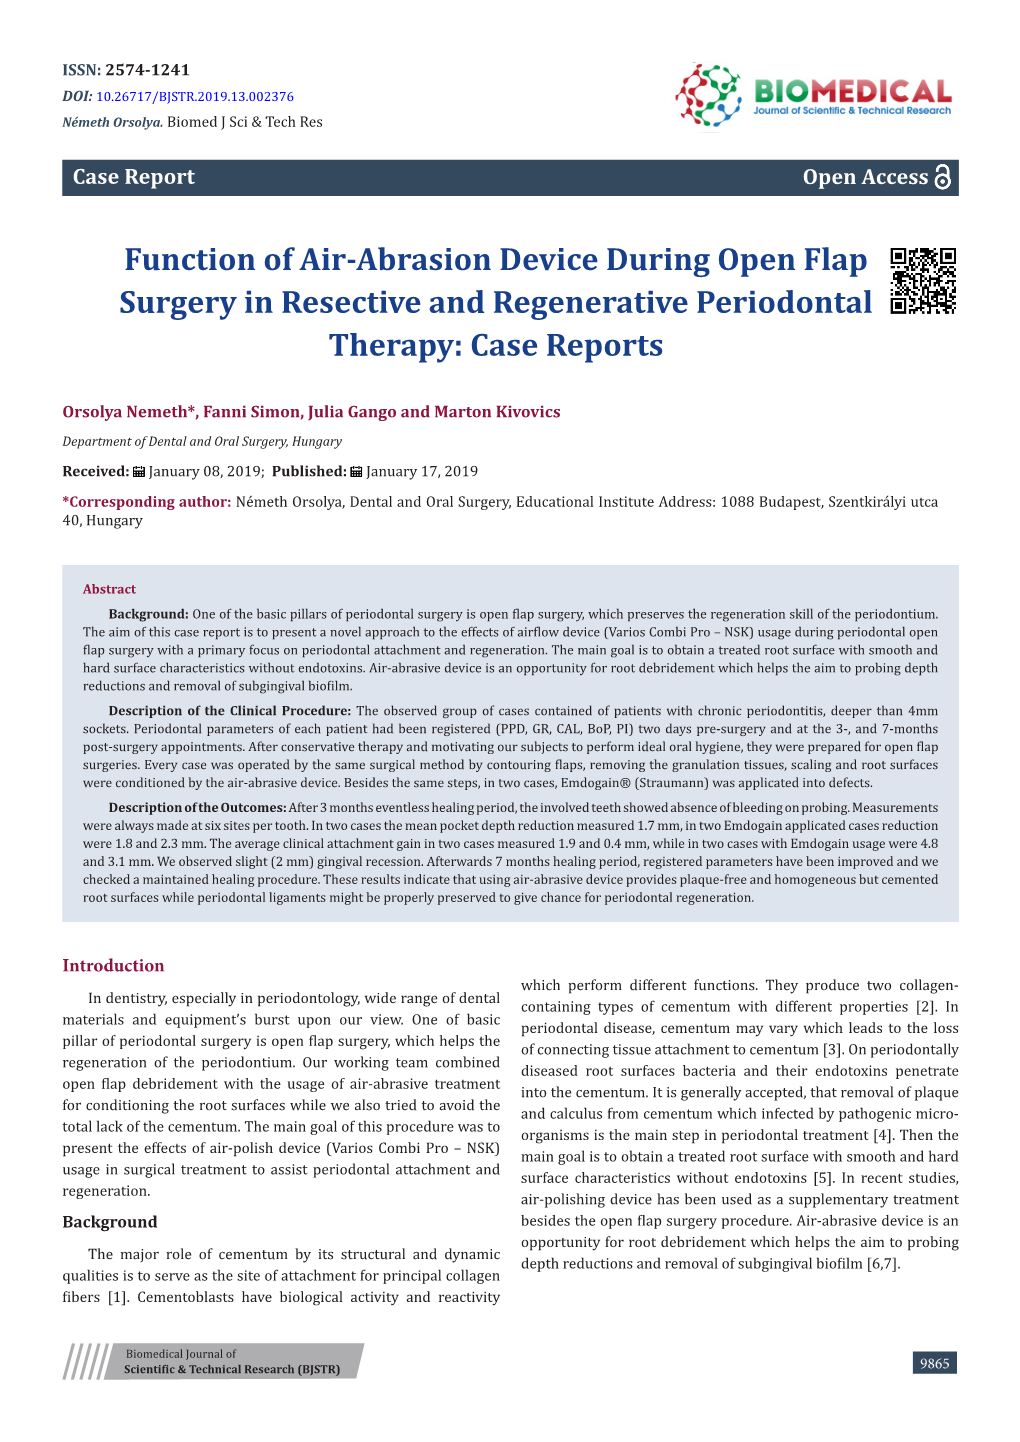 Function of Air-Abrasion Device During Open Flap Surgery in Resective and Regenerative Periodontal Therapy: Case Reports